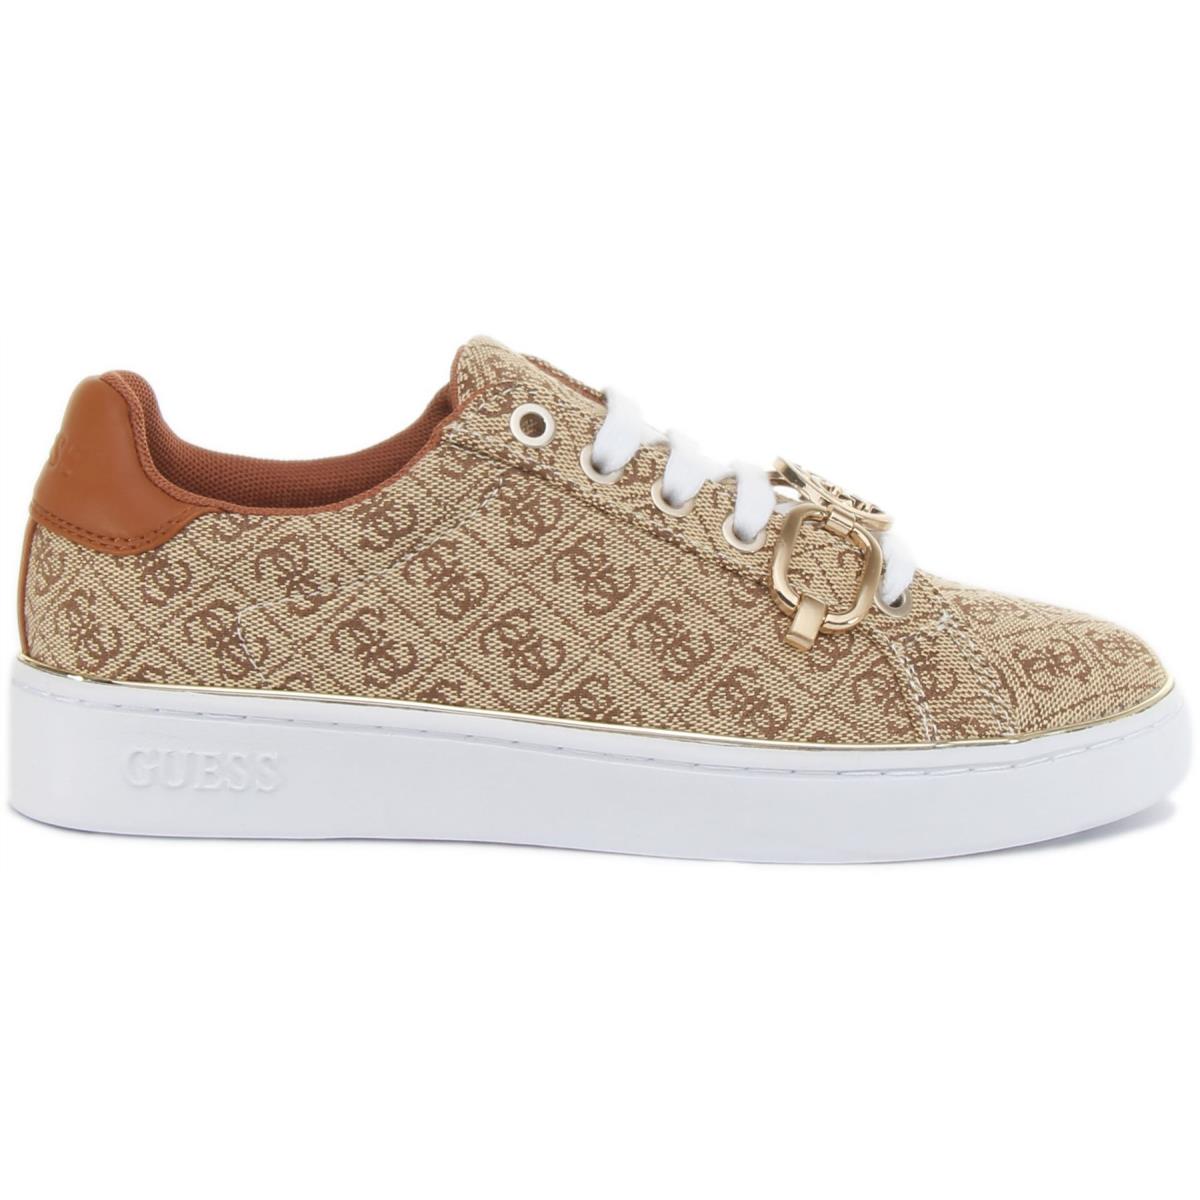 Guess Womens Babee Lace Up Trainers In Beige Brown Colour Size US 4 - 9